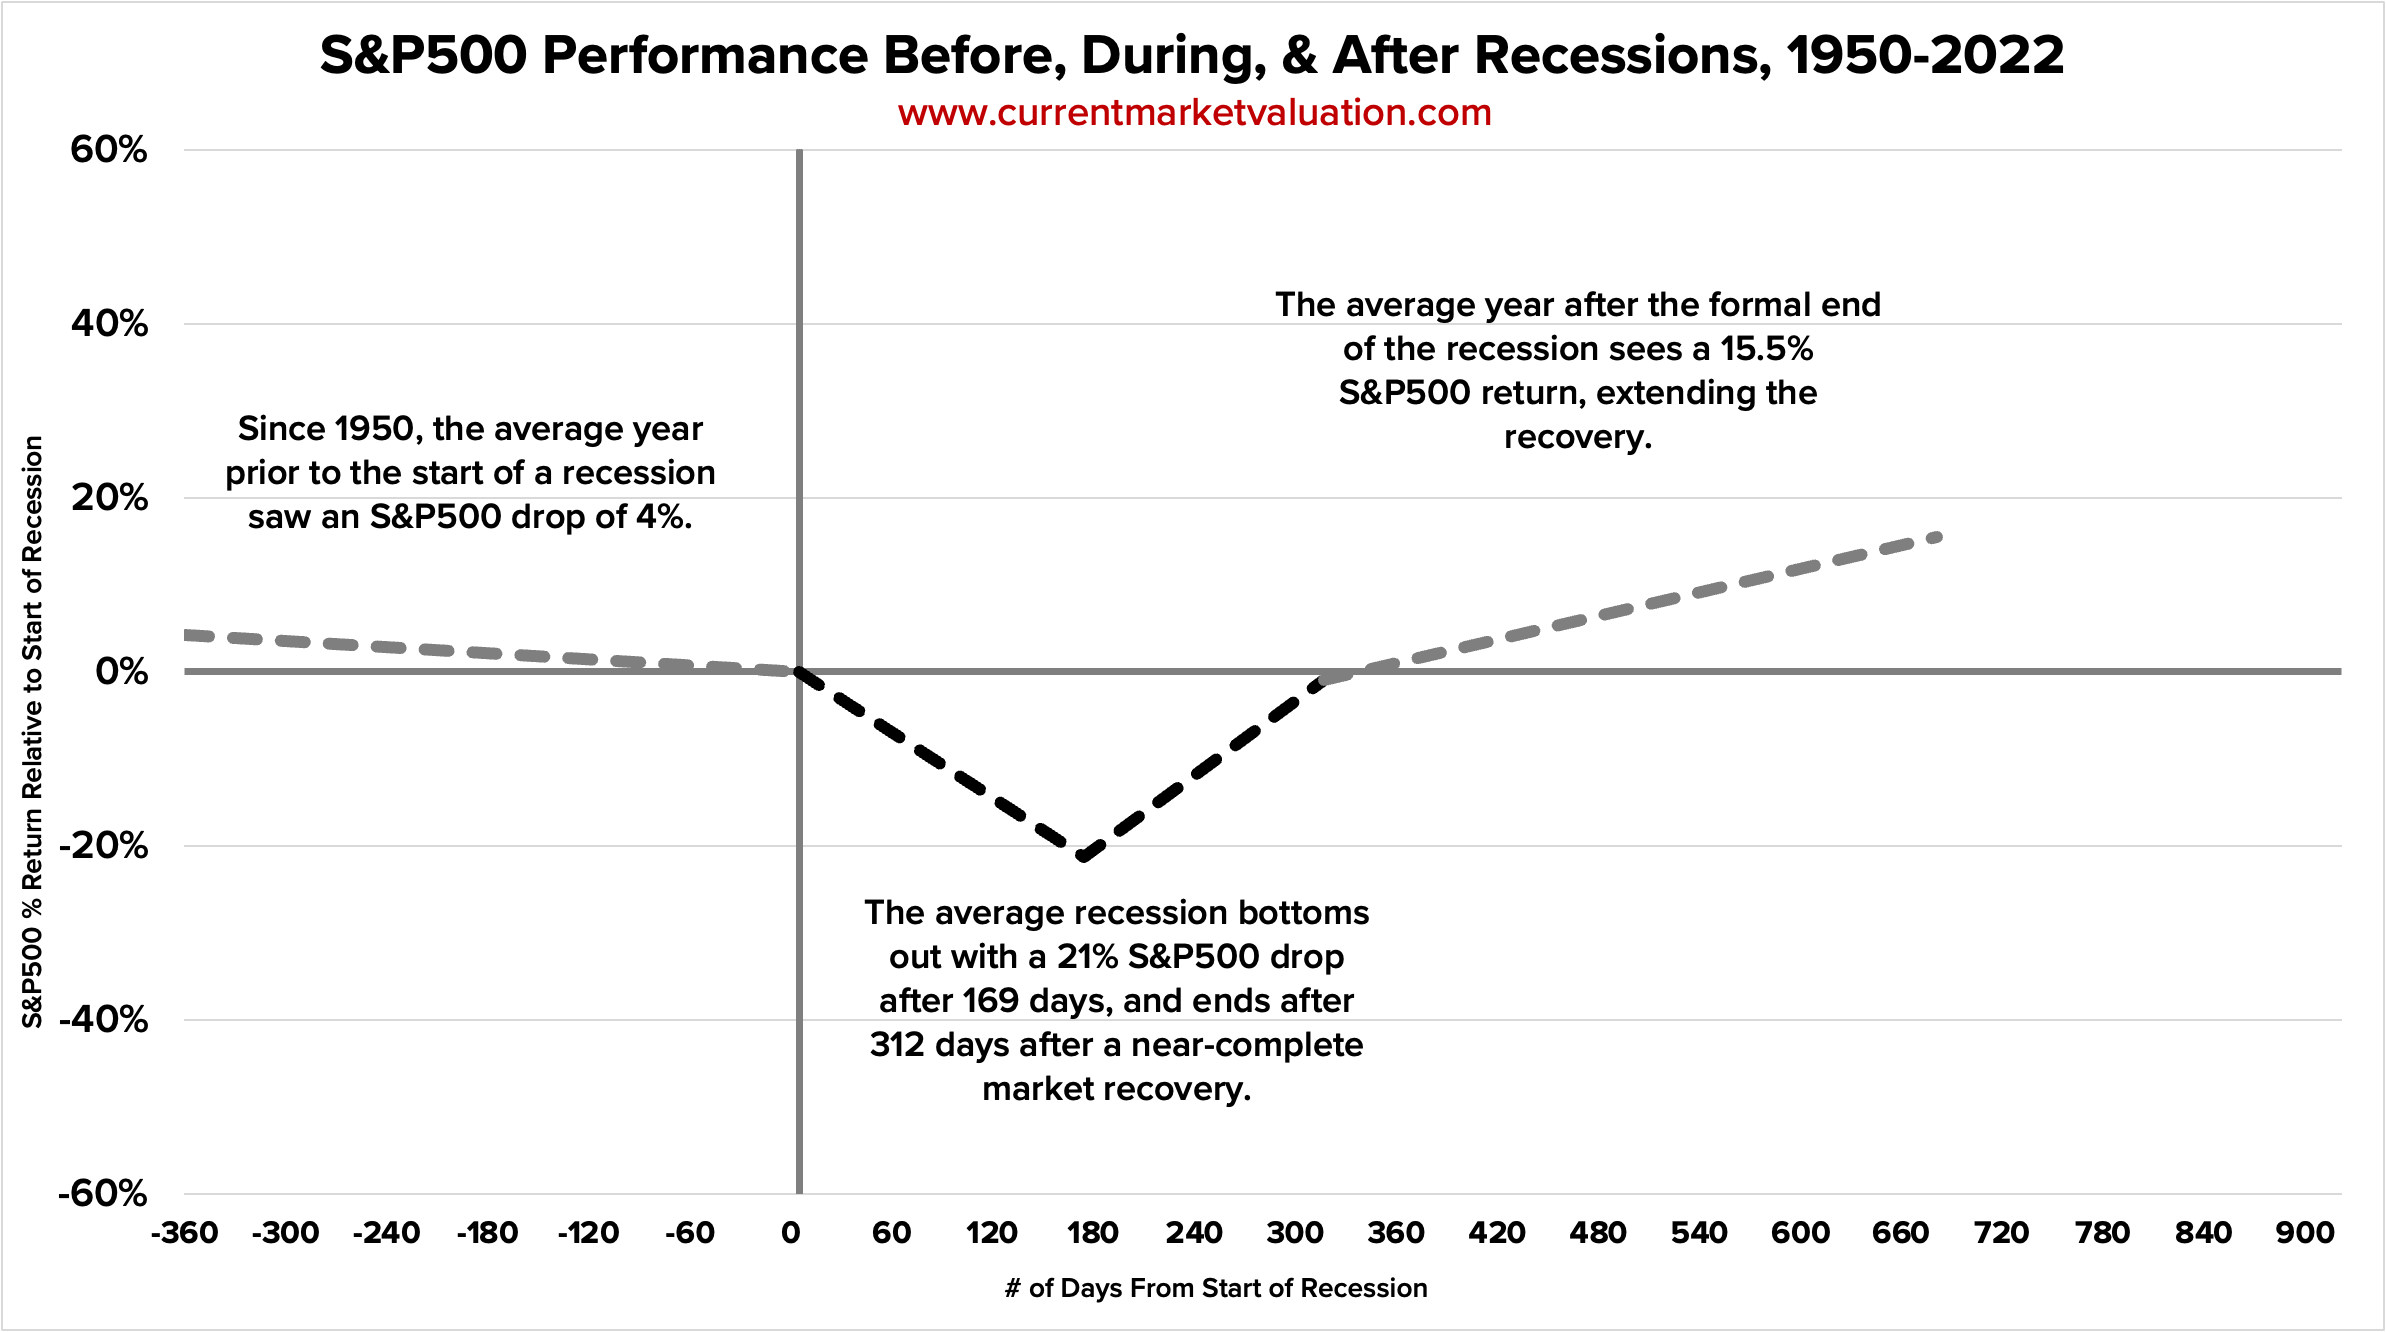 S&P500 Performance Before, During, and After Recessions, 1950-2022